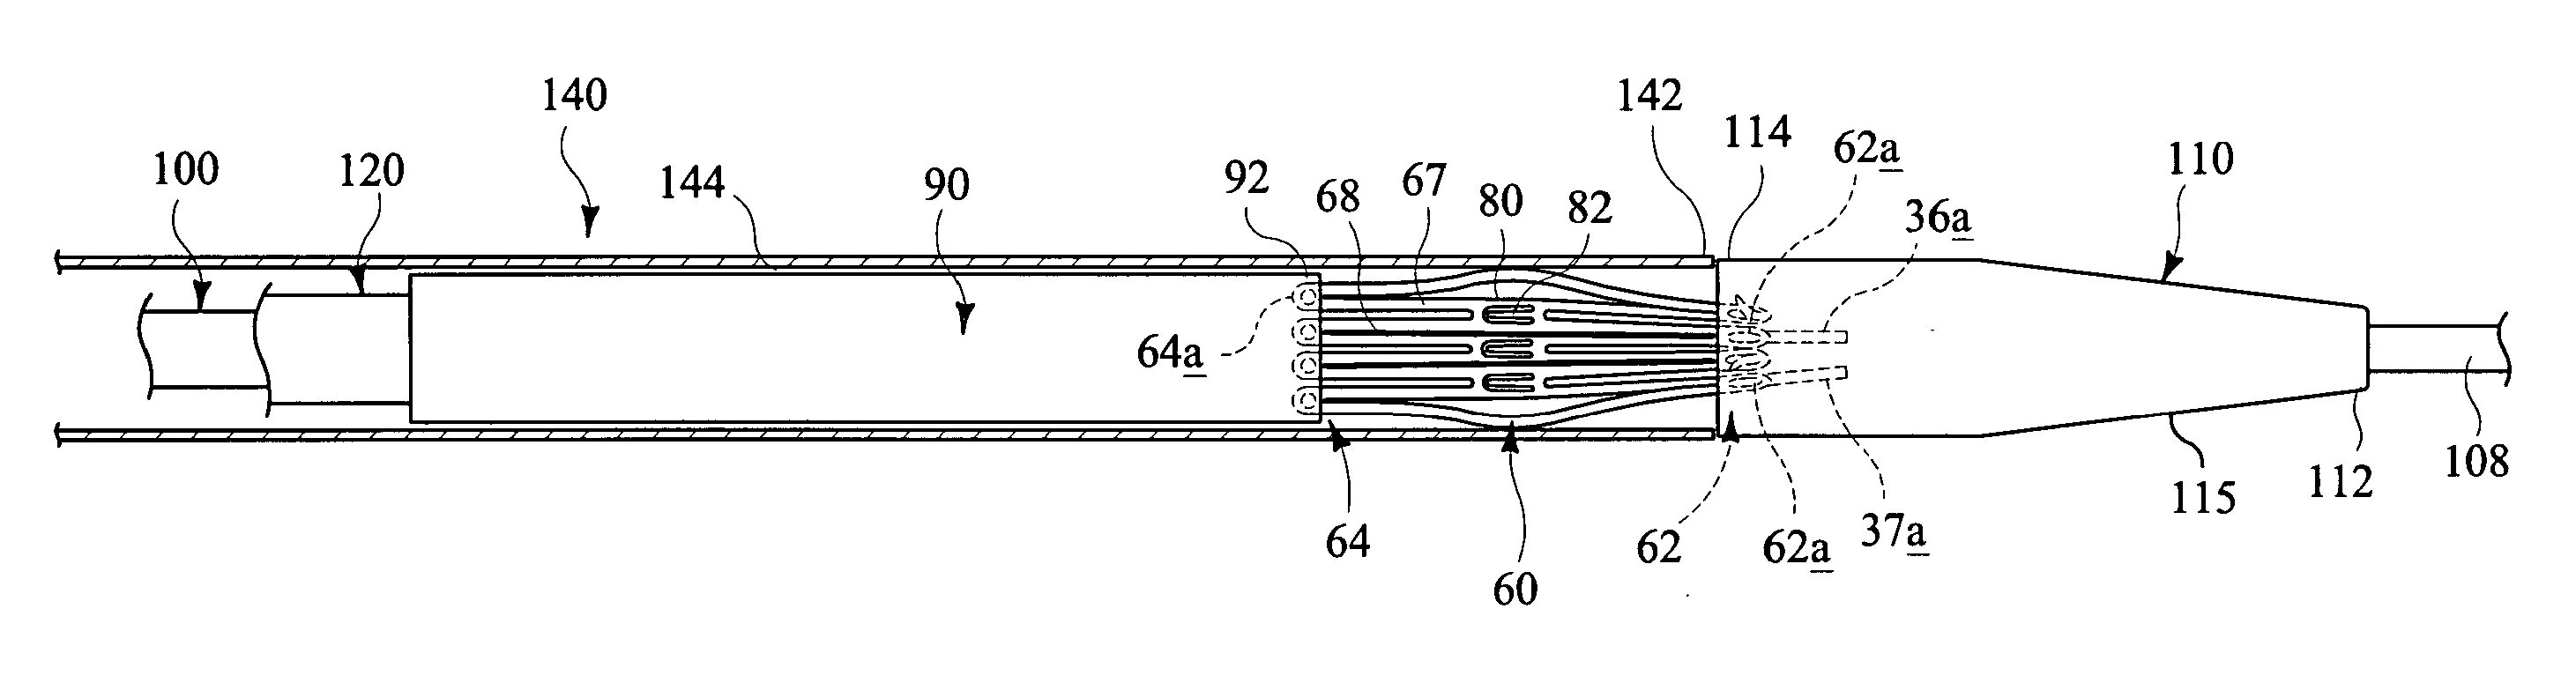 Apparatus and methods for improved stent deployment